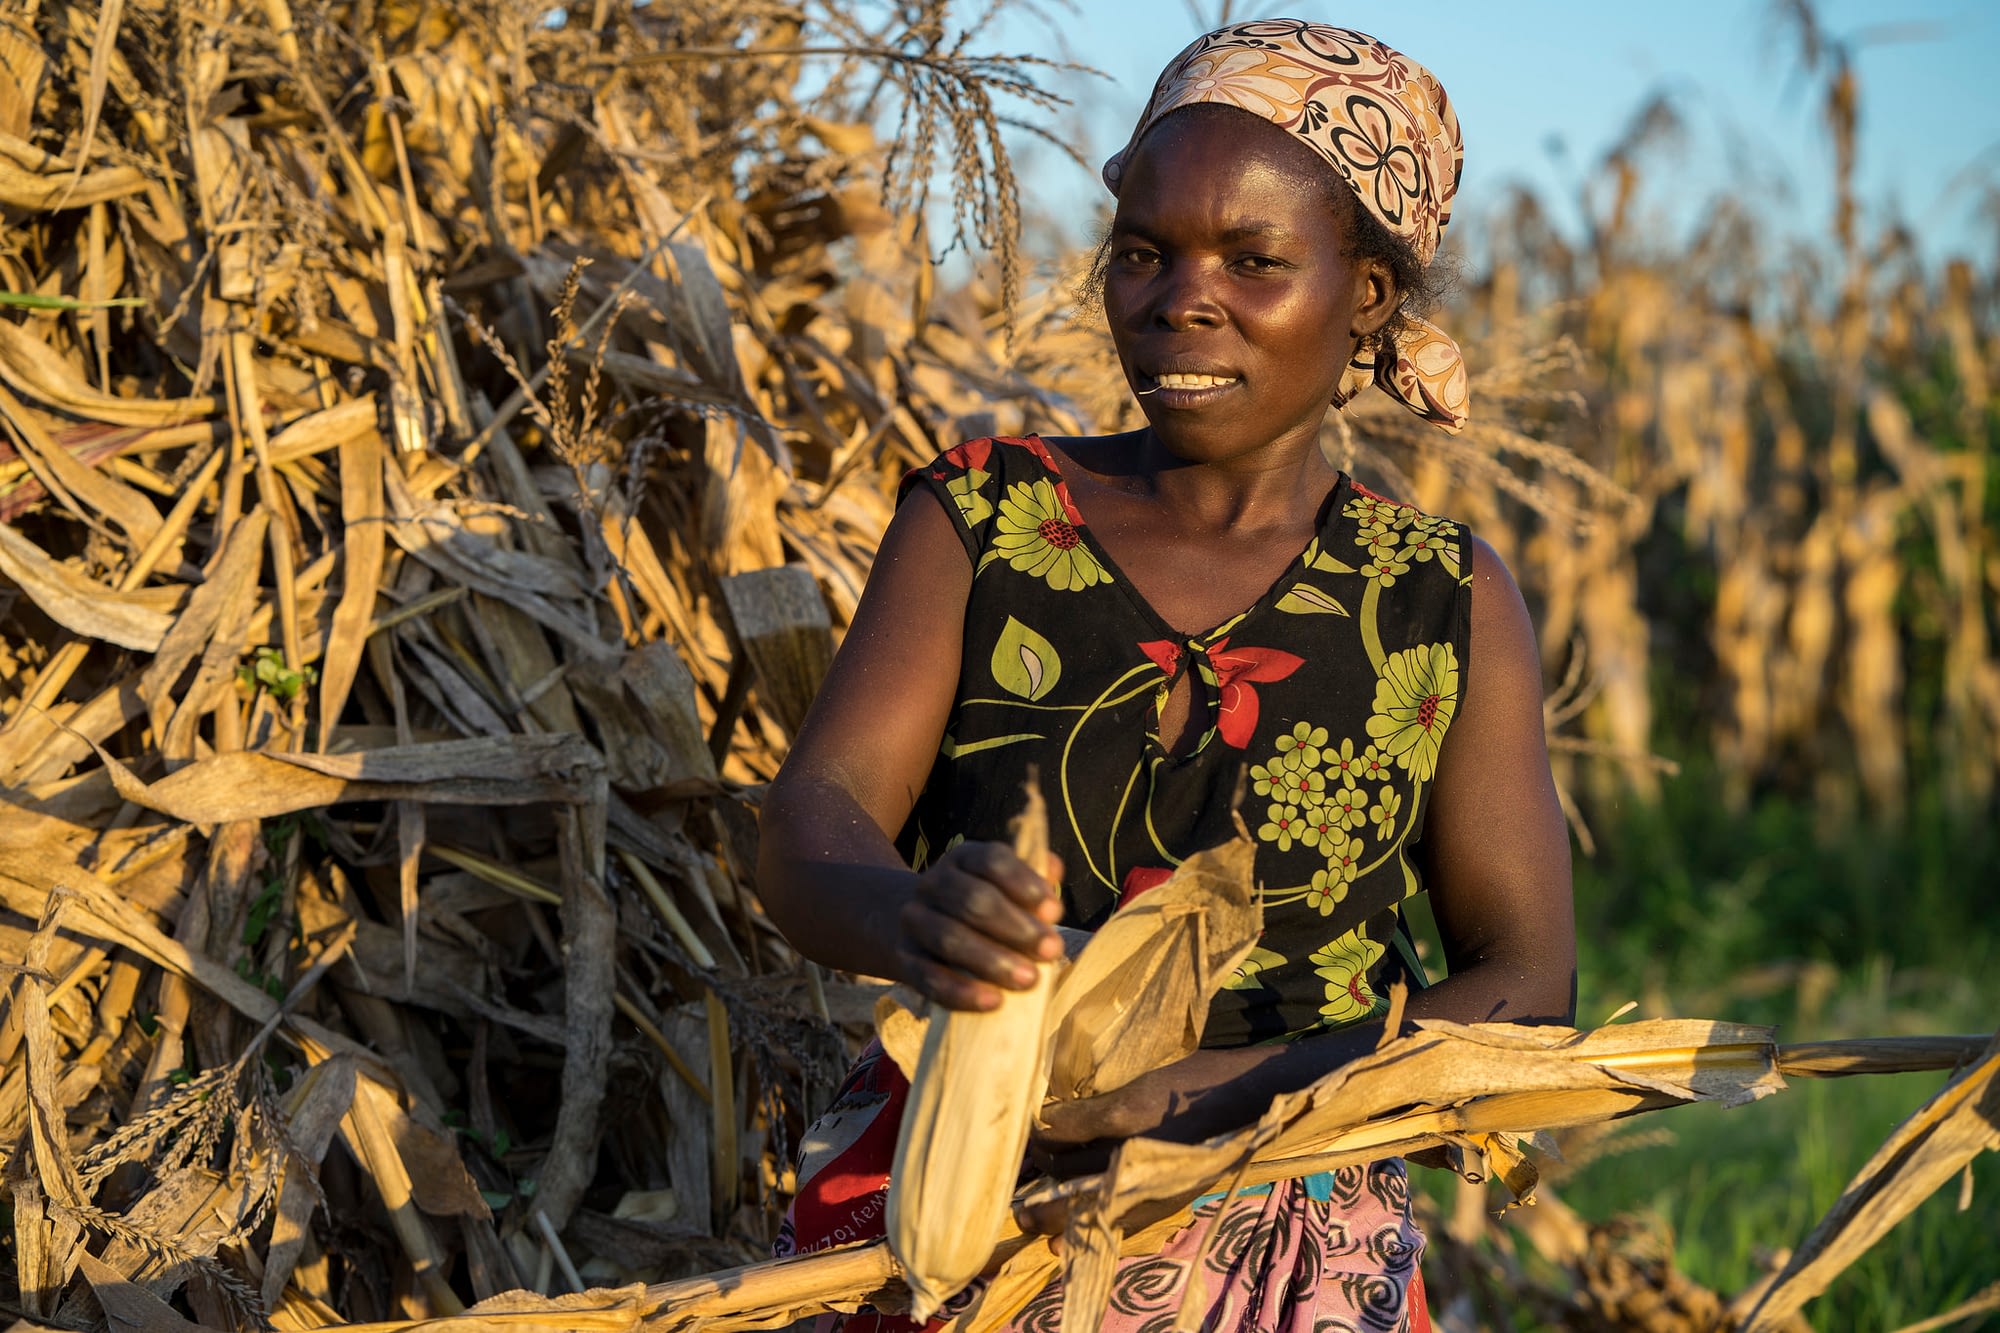 SIMLESA lead farmer Agnes Sendeza harvests maize cobs from a stook on her farm in Tembwe, Salima district, Malawi. (Photo: Peter Lowe/CIMMYT)